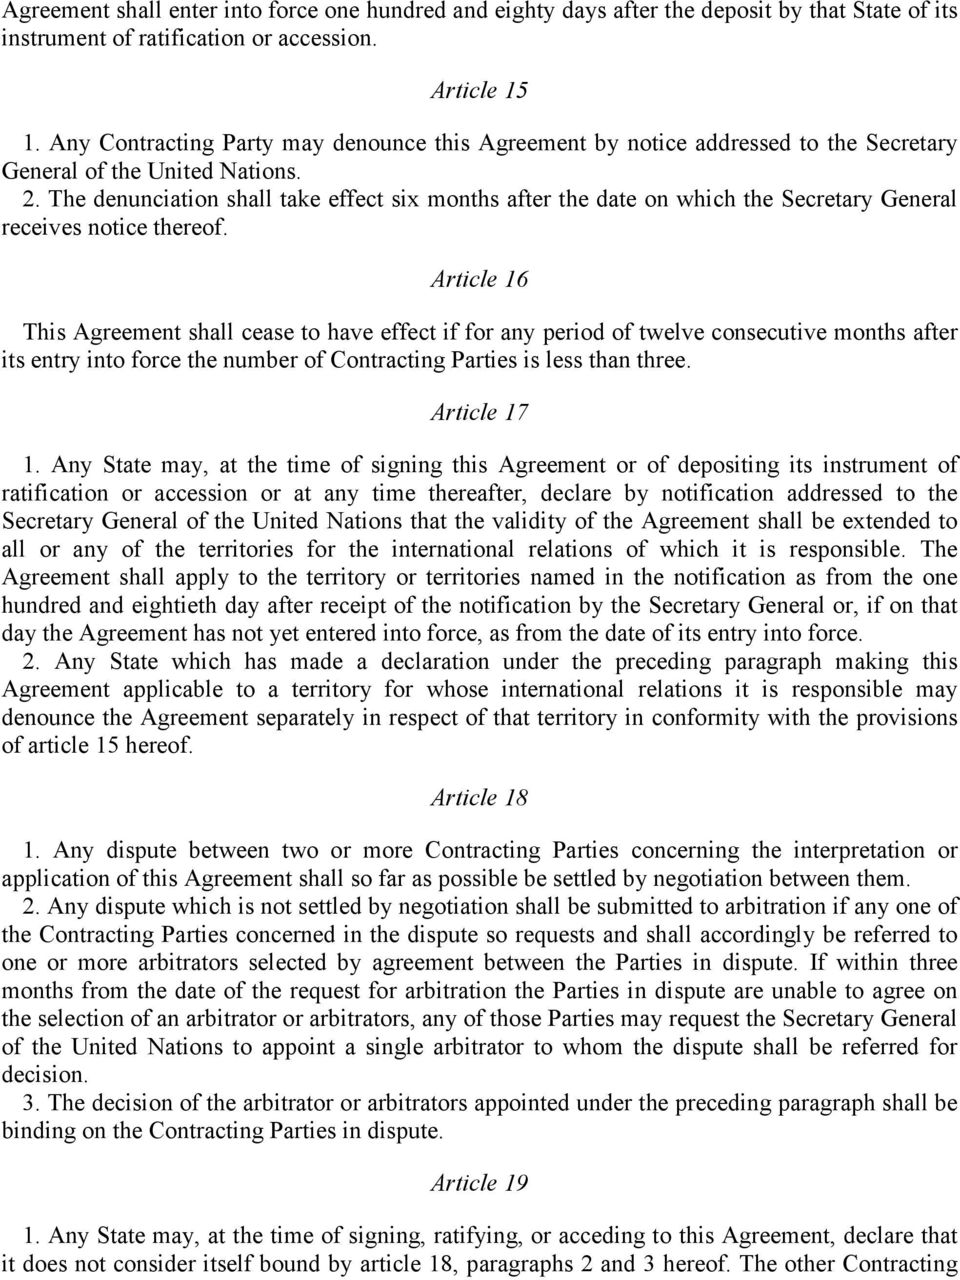 The denunciation shall take effect six months after the date on which the Secretary General receives notice thereof.